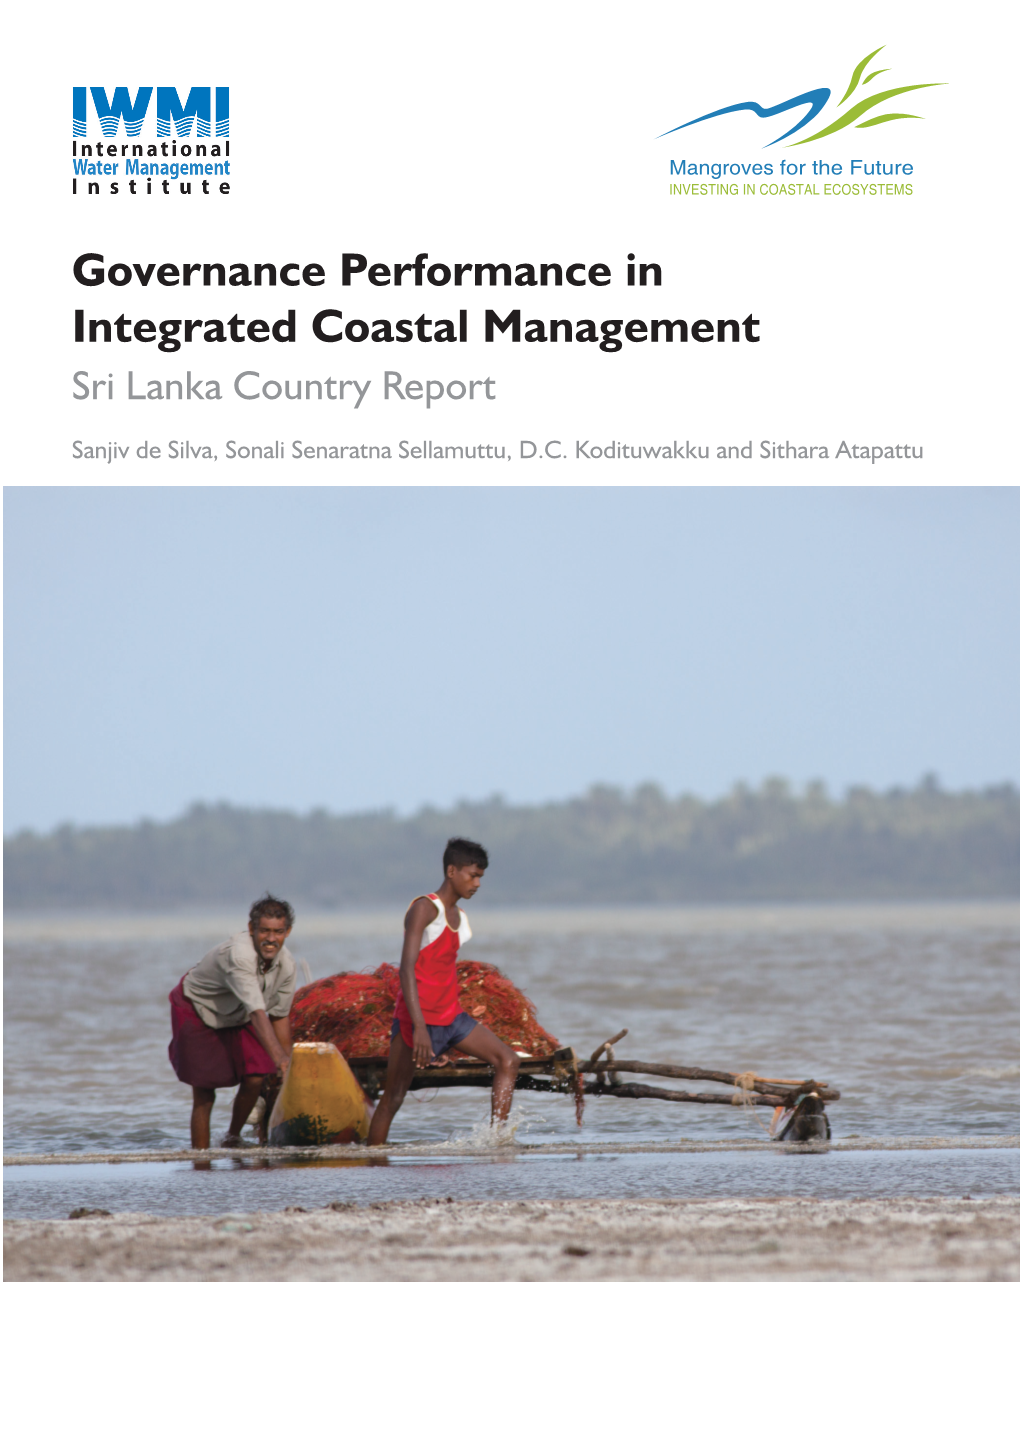 Governance Performance in Integrated Coastal Management Sri Lanka Country Report